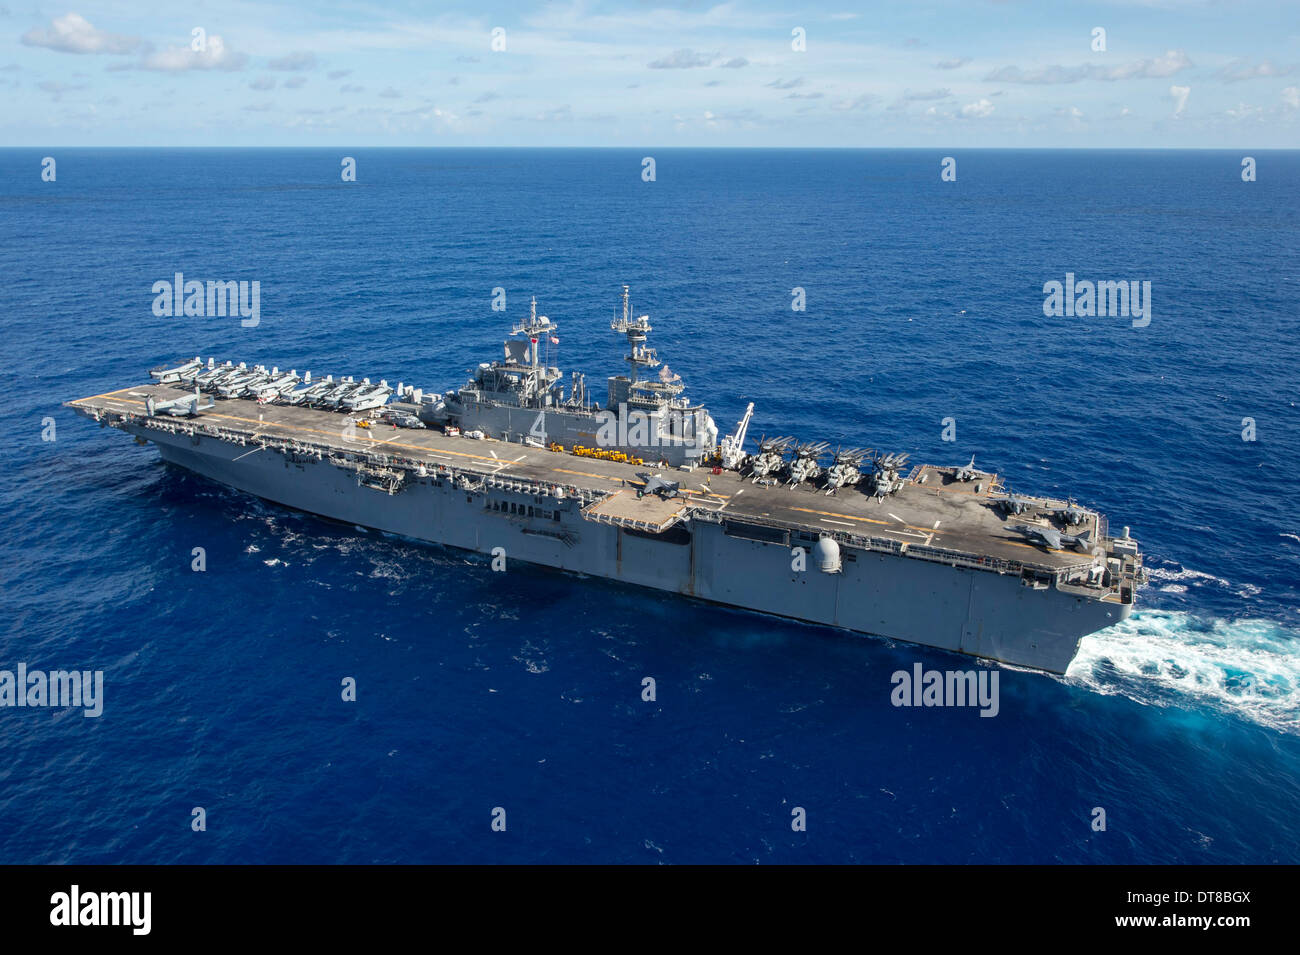 Pacific Ocean, September 5, 2013 - The amphibious assault ship USS Boxer (LHD-4) transits the Pacific Ocean. Stock Photo